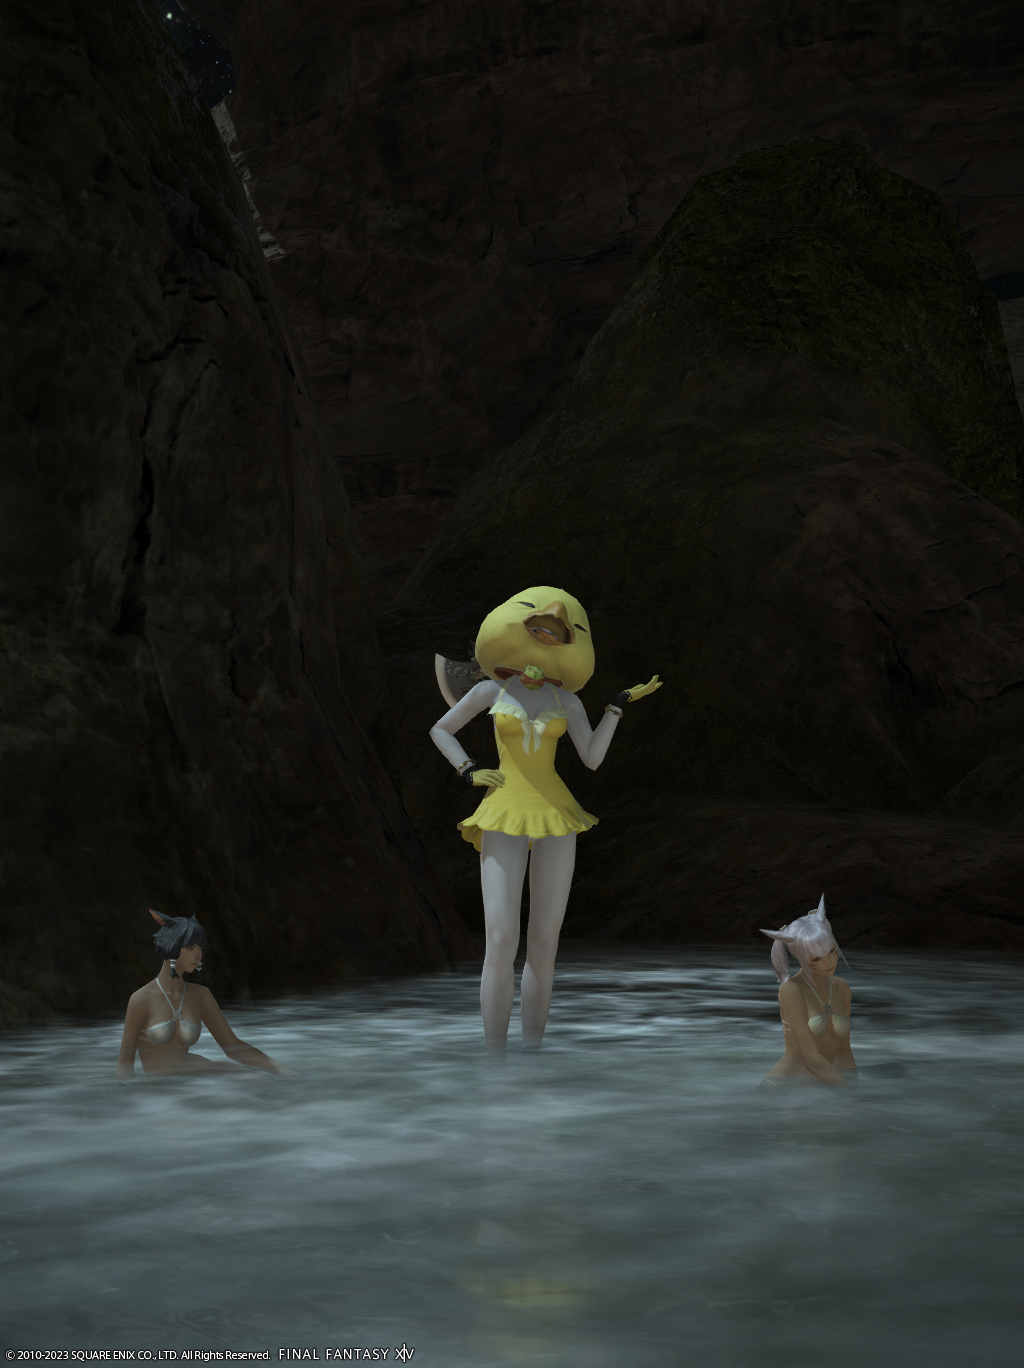 An image of a character from FFXIV. She is wearing a yellow bathing suit and a fat chocobo head and standing in front of a waterfall, flanked by two miqote in bathing suits.